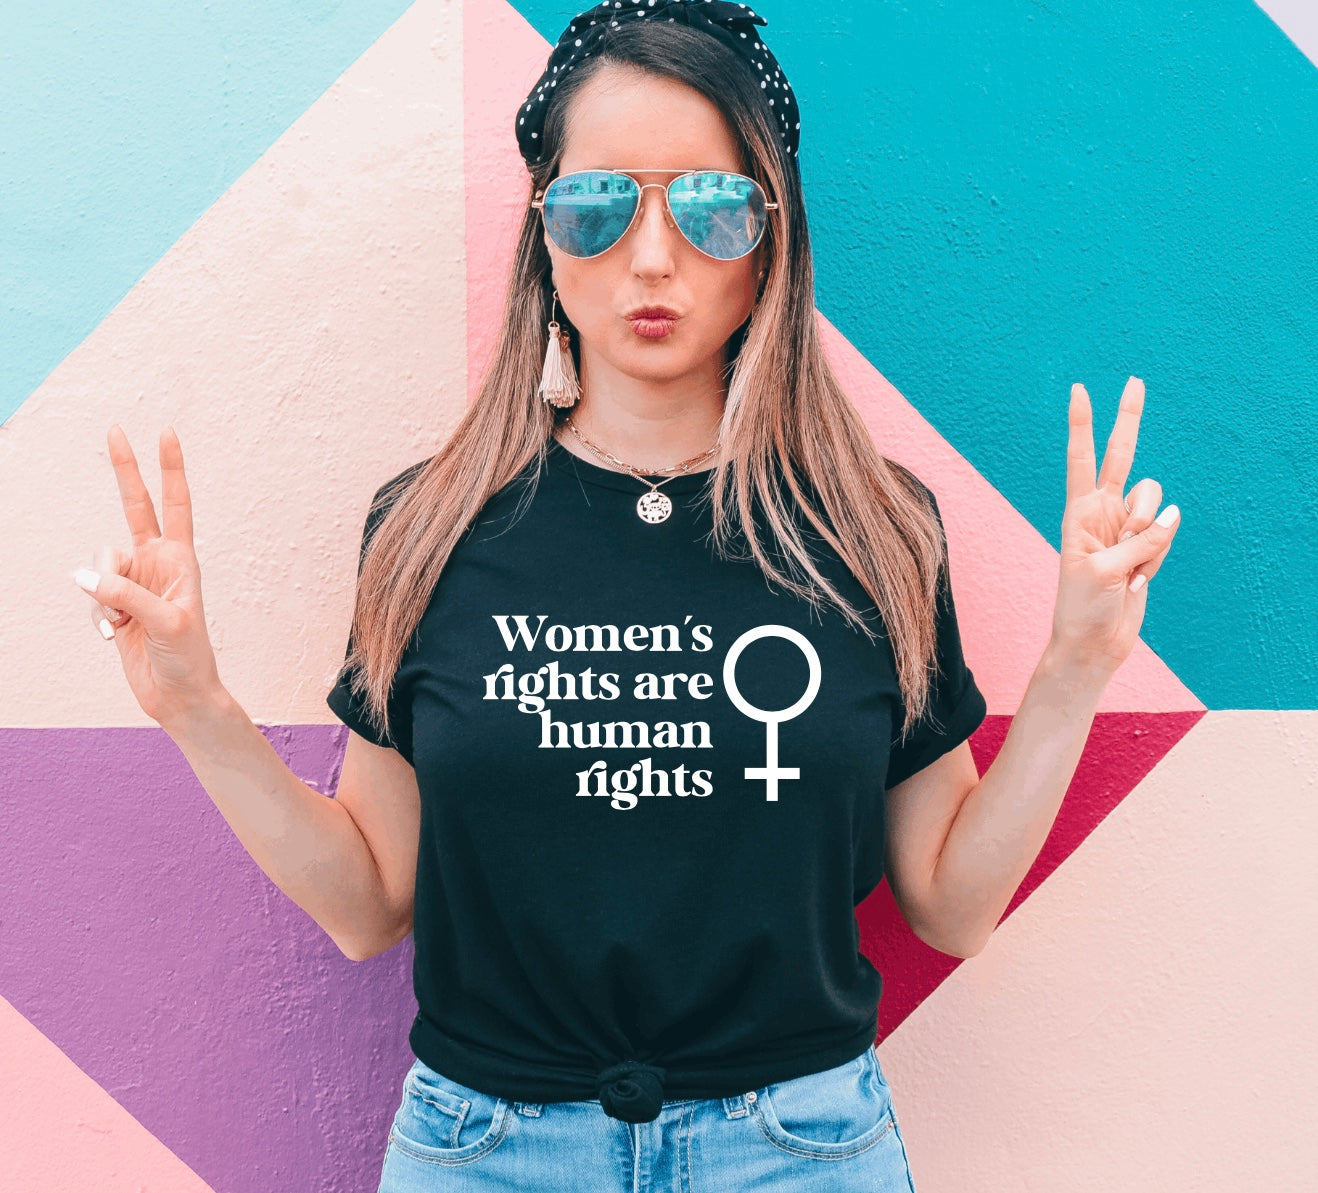 Women’s rights are human rights t-shirt 